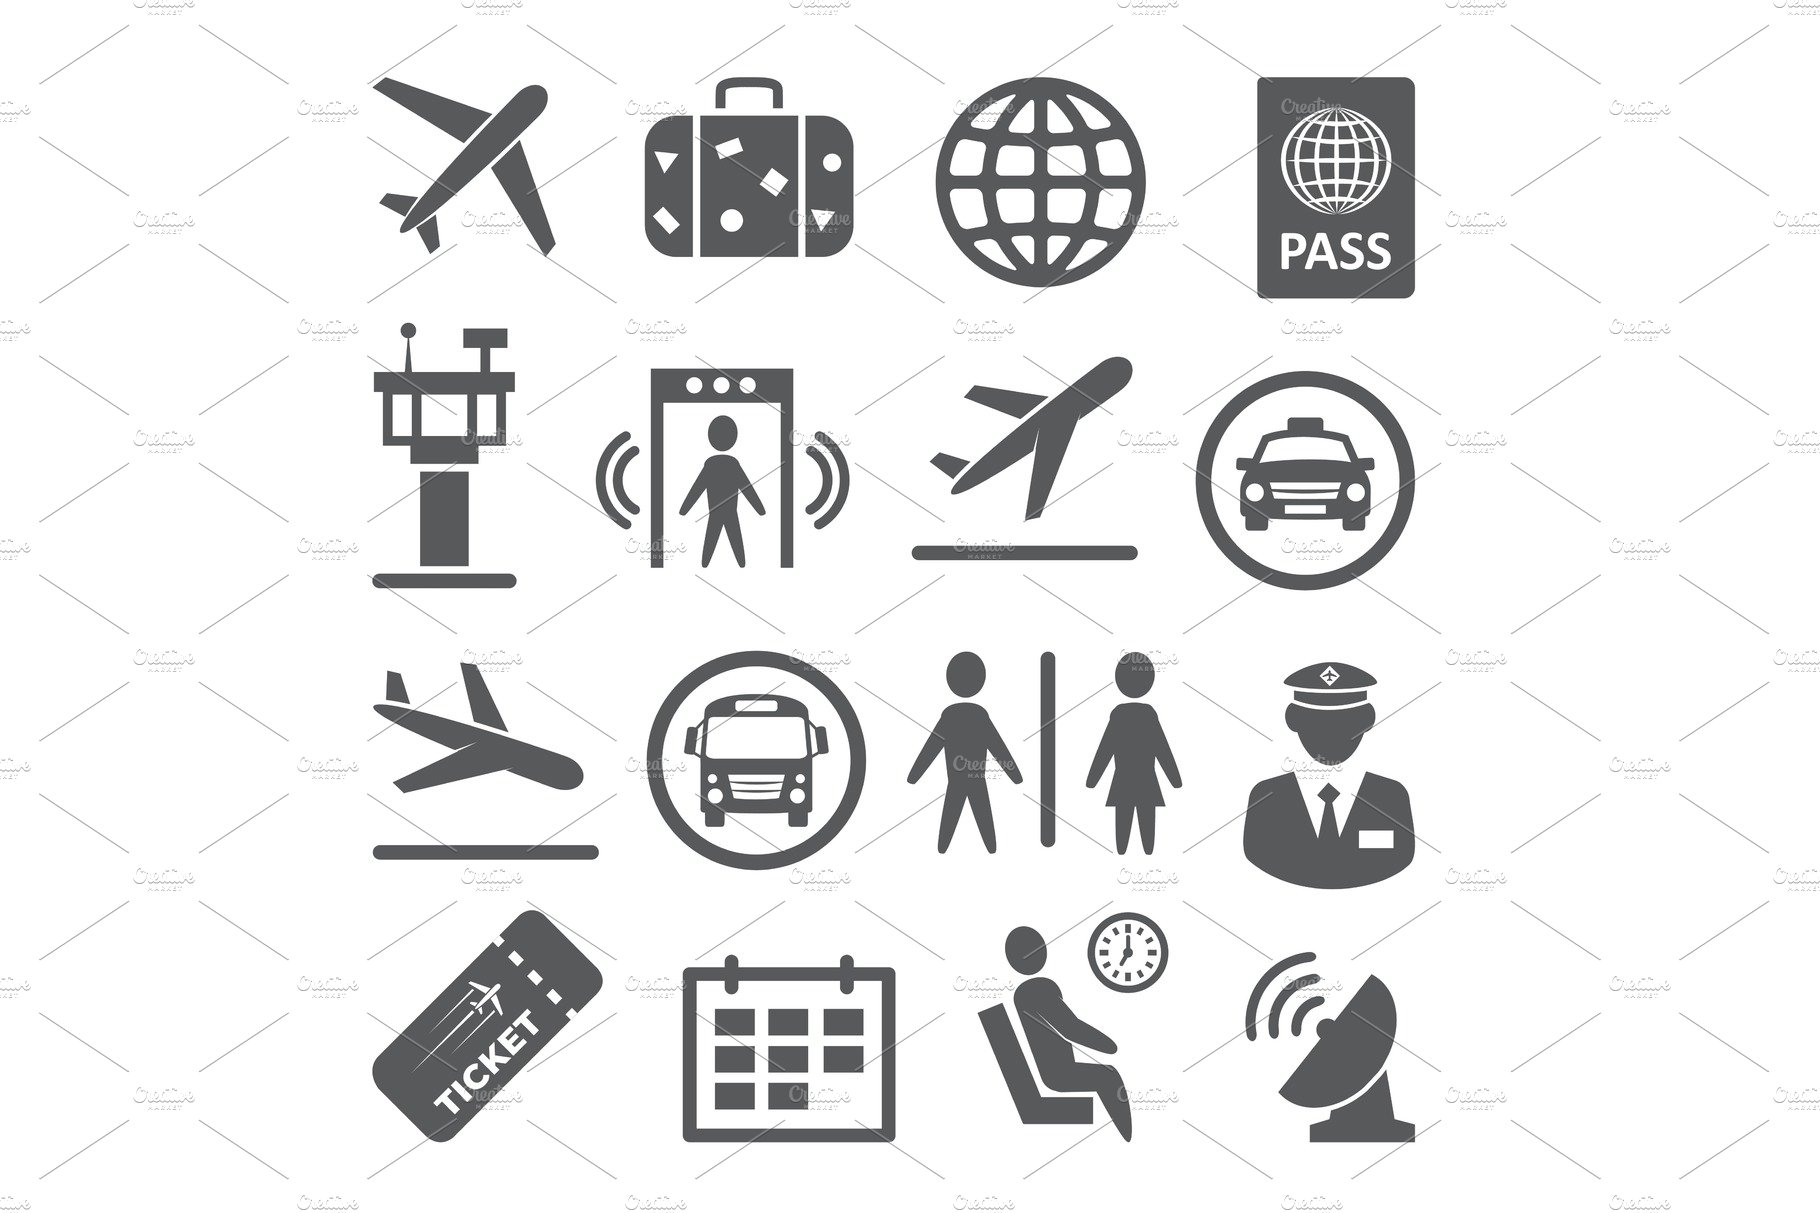 Airport icons set on white cover image.